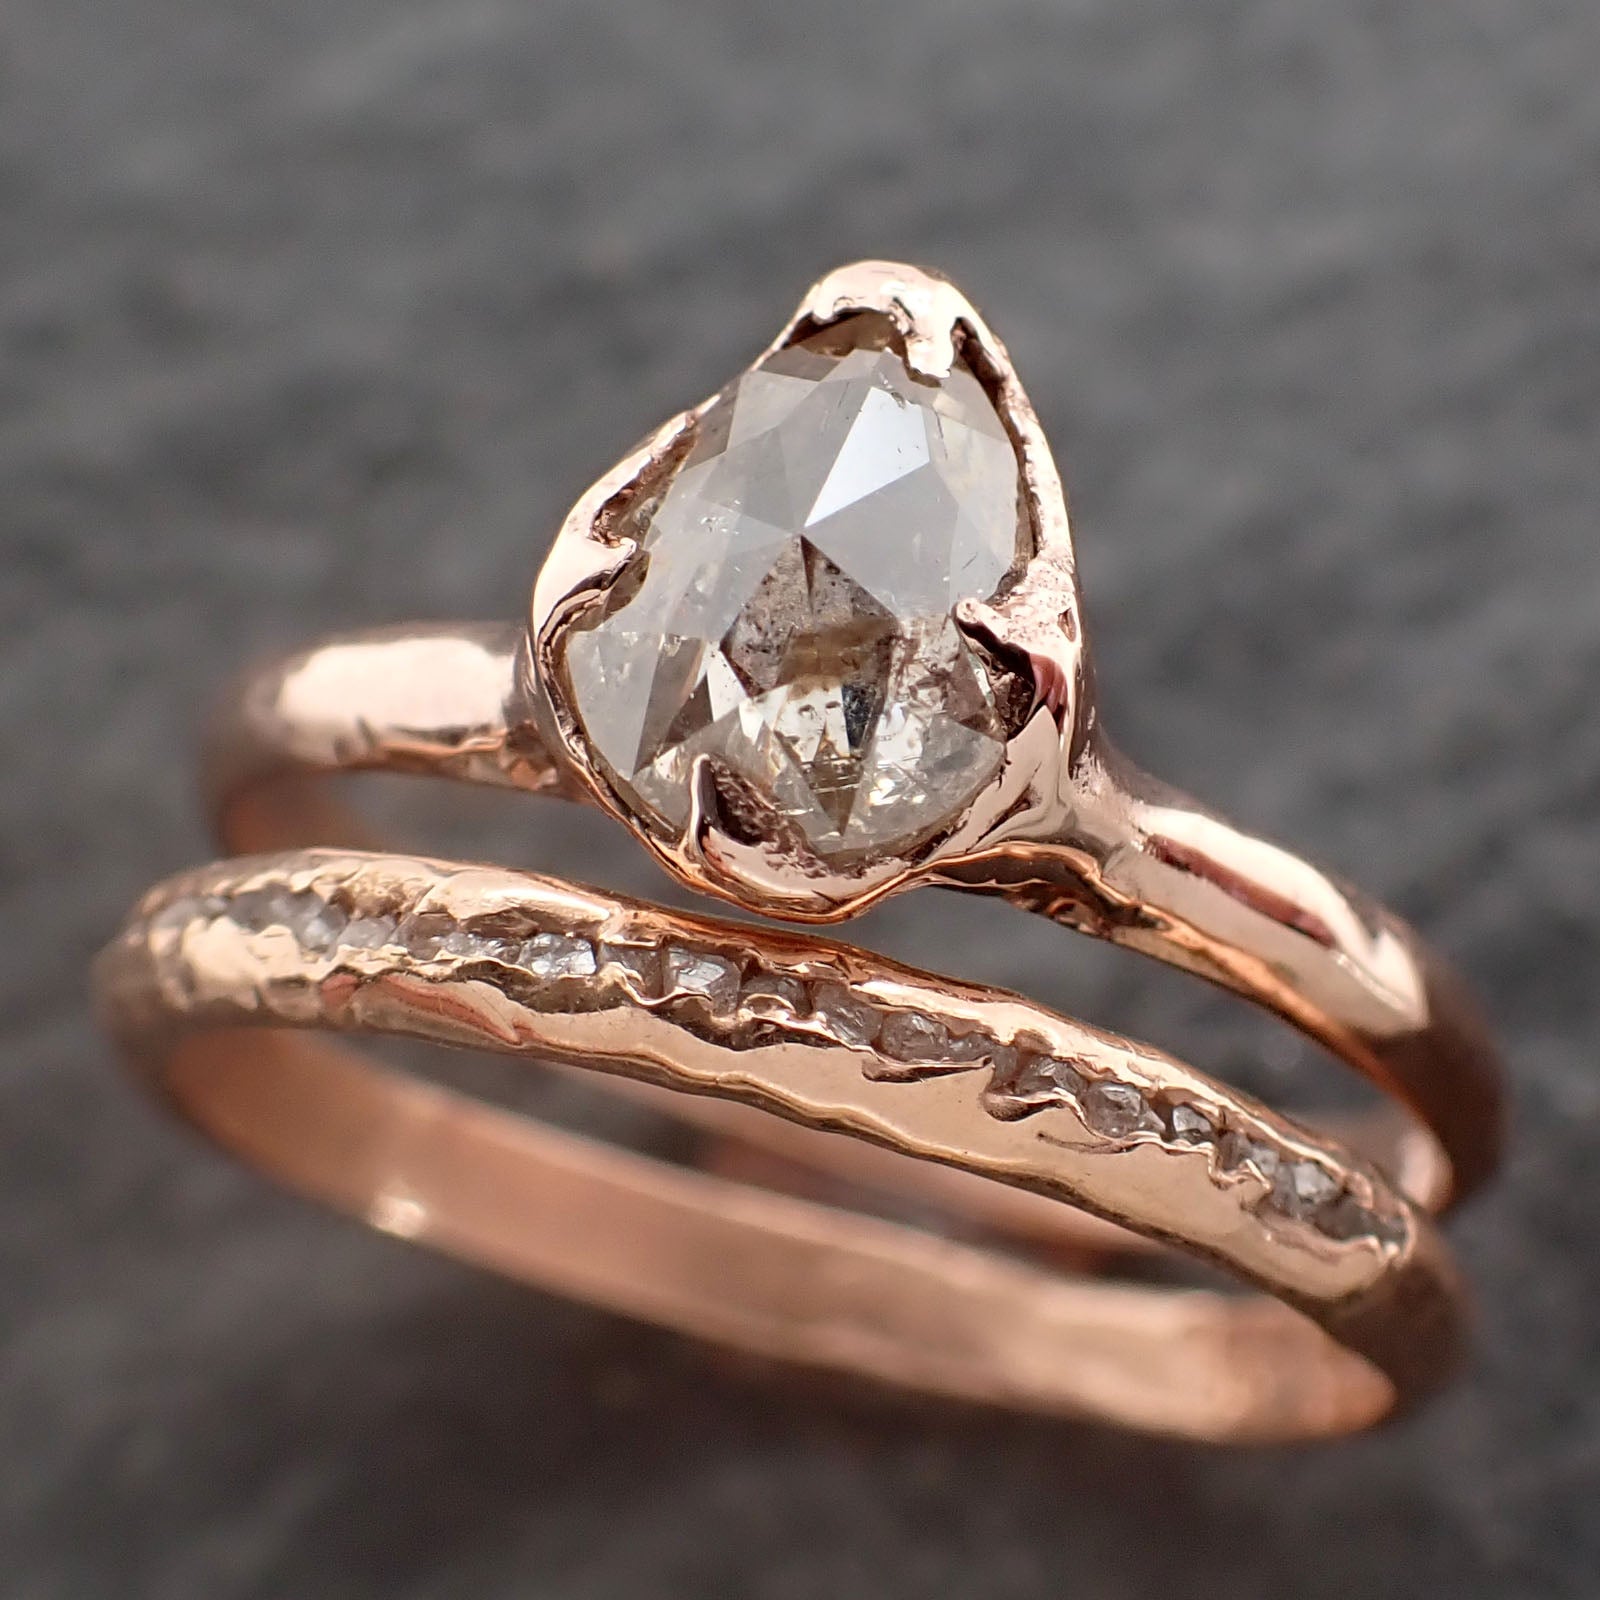 Faceted Fancy cut Salt and Pepper Diamond Solitaire Engagement 14k Rose Gold Wedding Ring byAngeline 2588